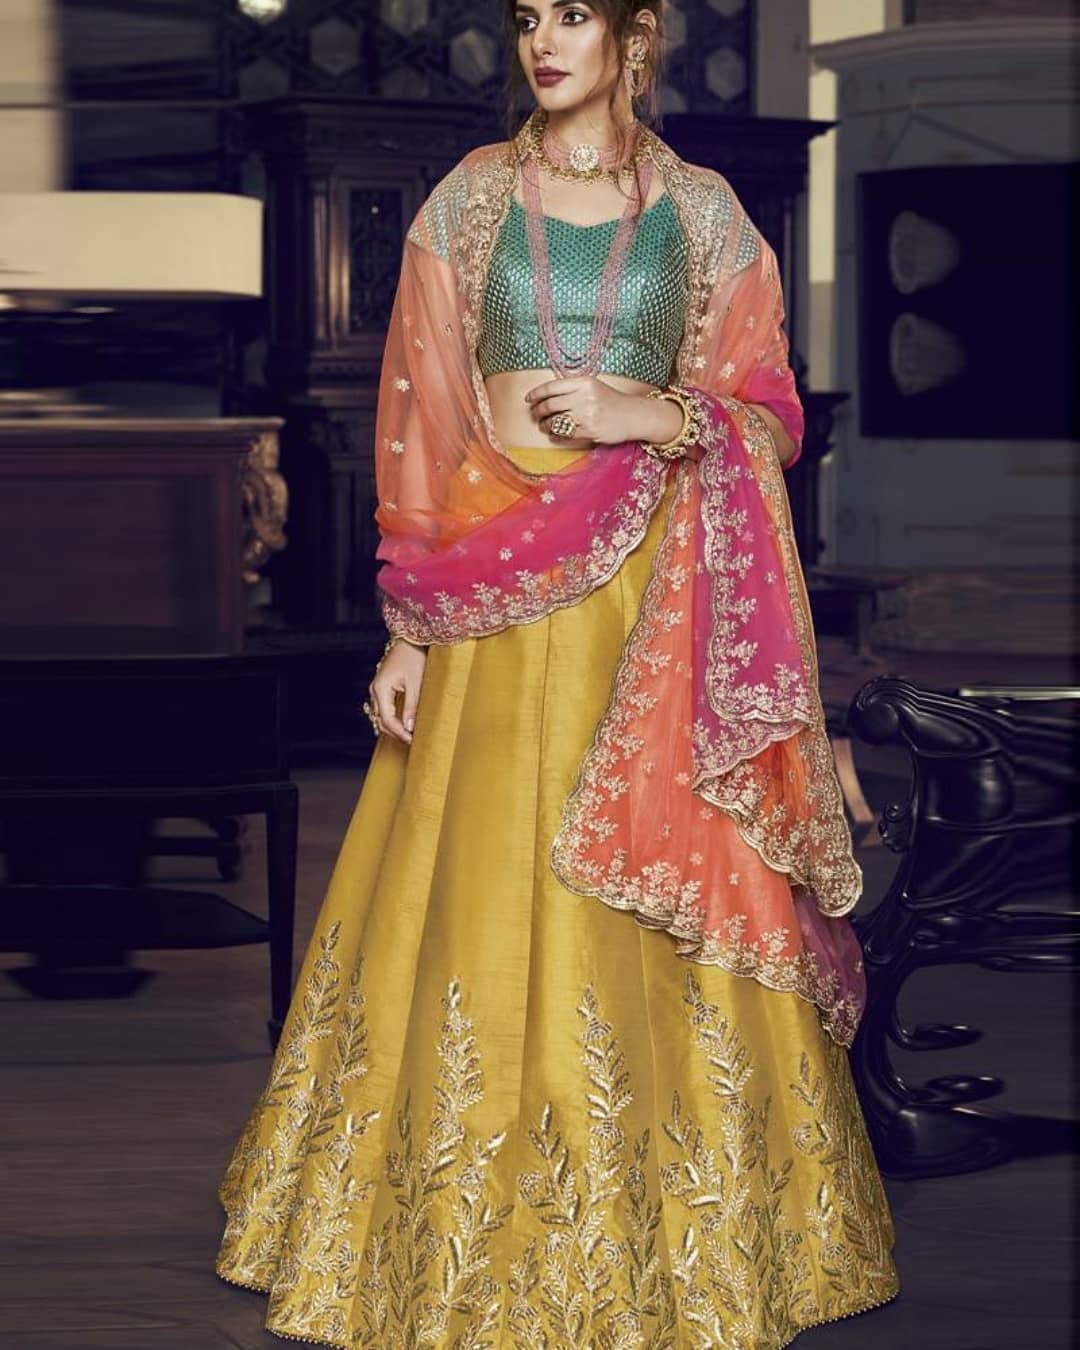 Mirraw - The prettiest yellow lehengas on mirraw.com which you can consider for your #haldiceremony #haldioutfit #haldi 
Somehow the prettiest Haldi photos come out when the bride herself is wearing y...